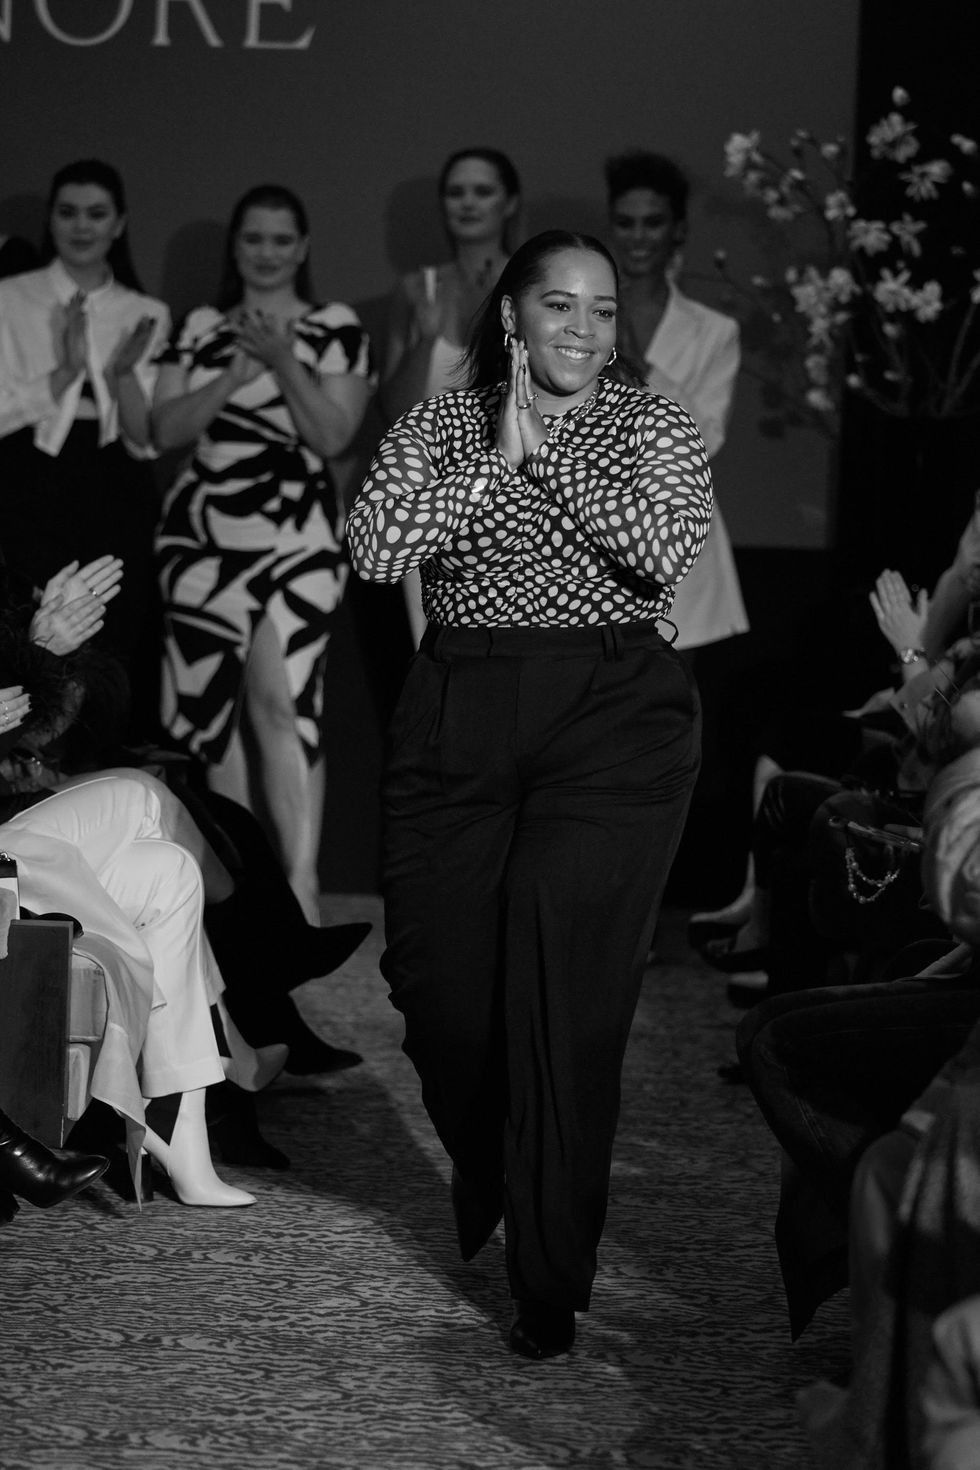 First plus-size designer label to show at New York Fashion Week